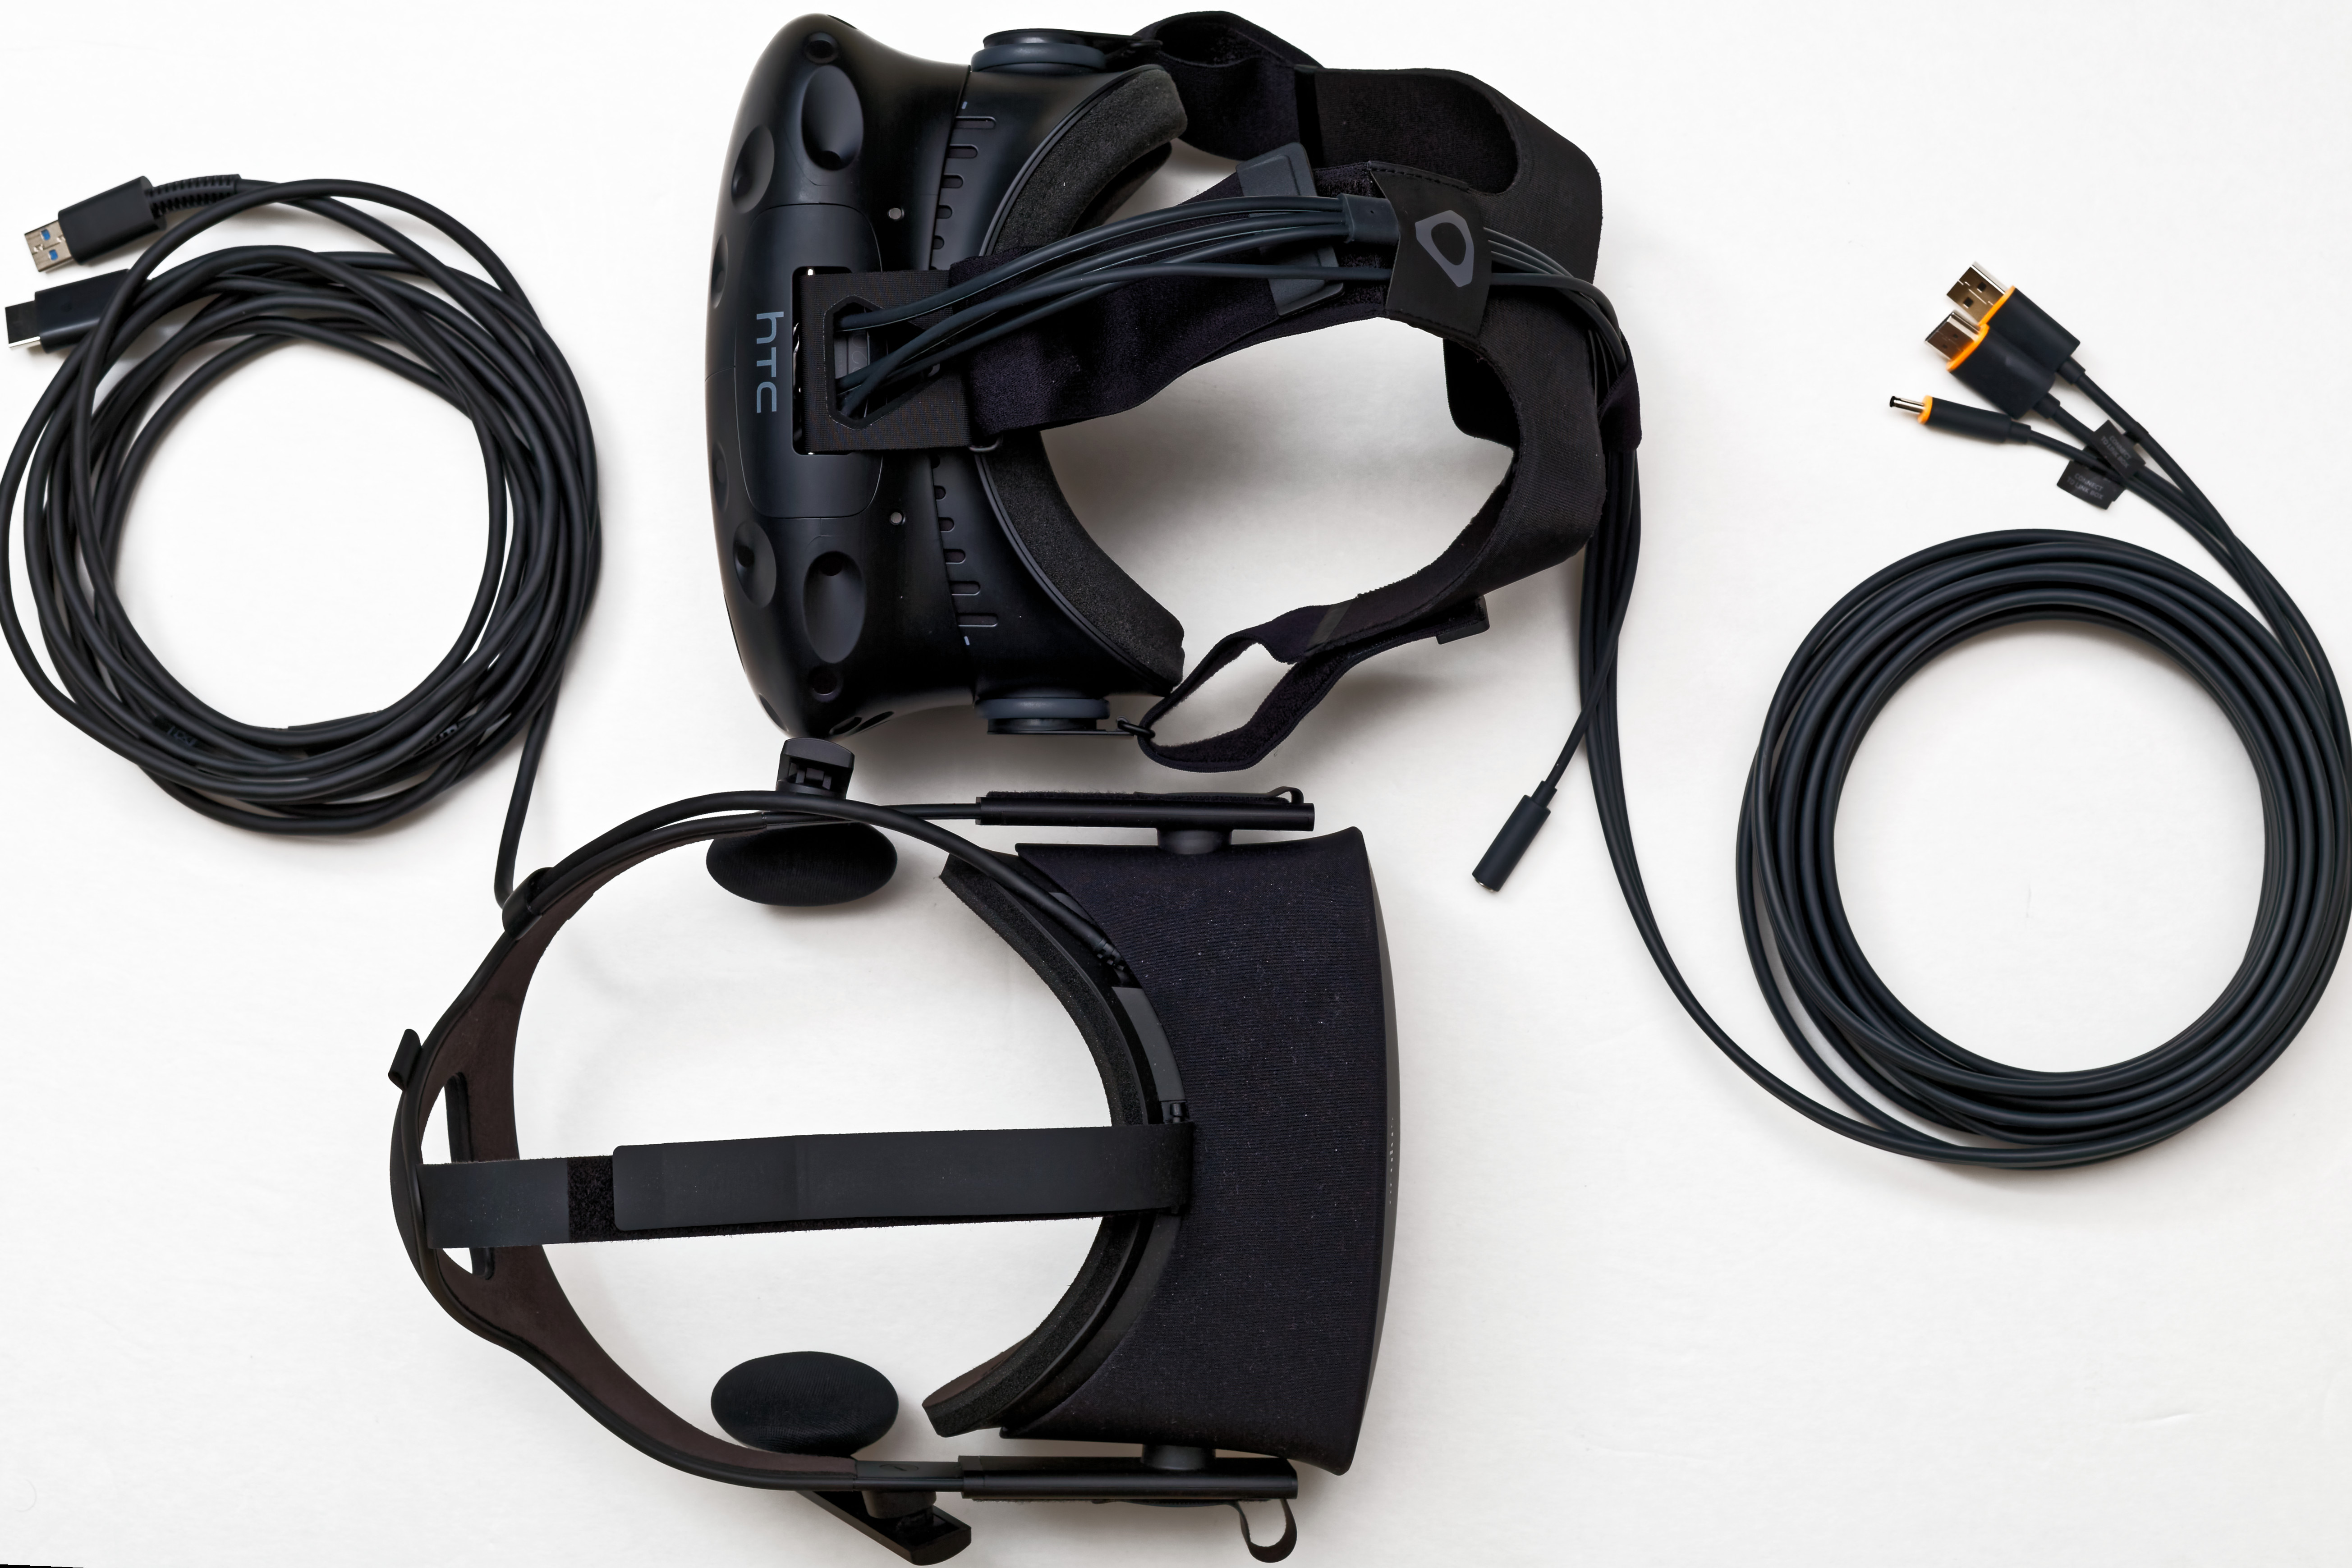 For this gadgethead, the HTC Vive may force my Oculus Rift to collect dust